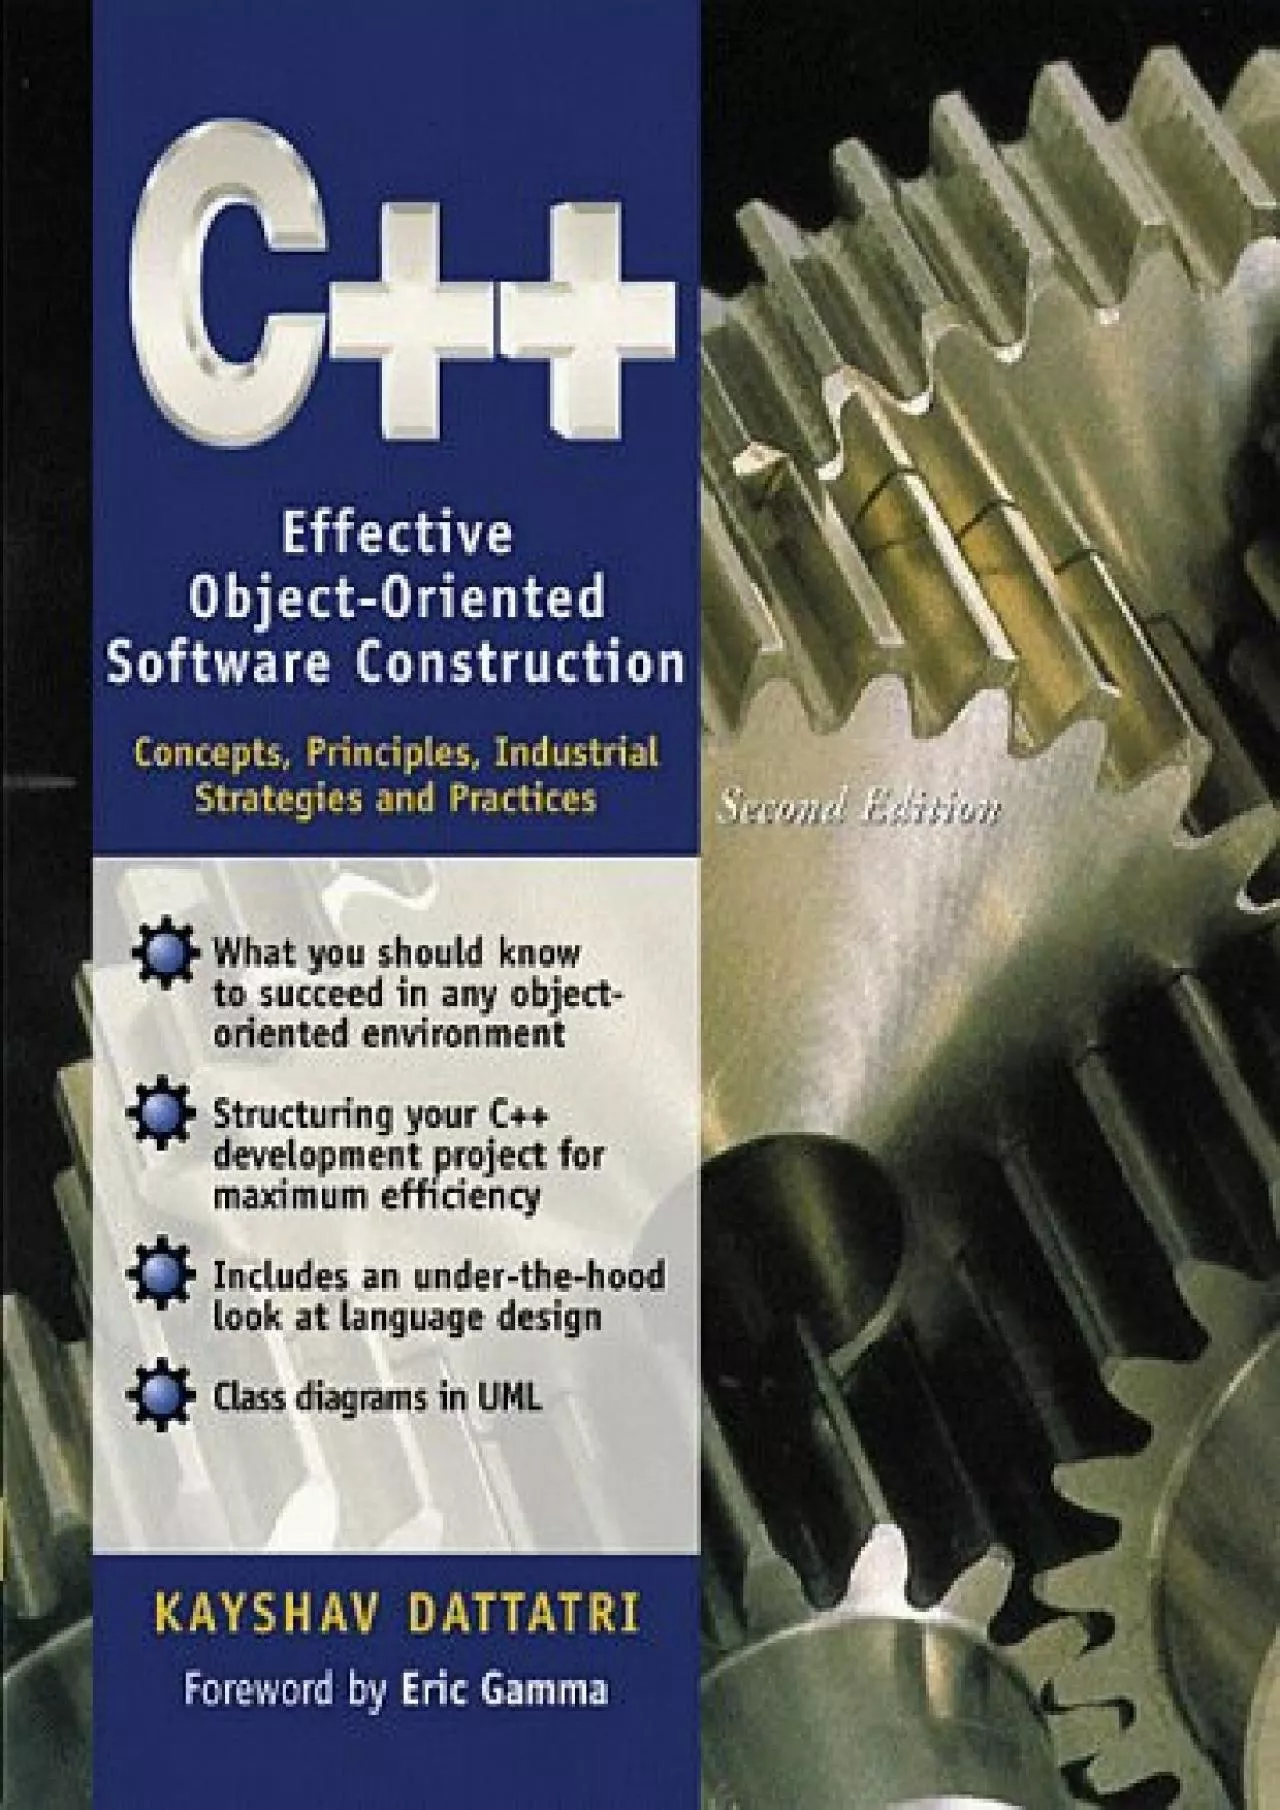 [BEST]-C++: Effective Object-Oriented Software Construction : Concepts, Principles, Industrial